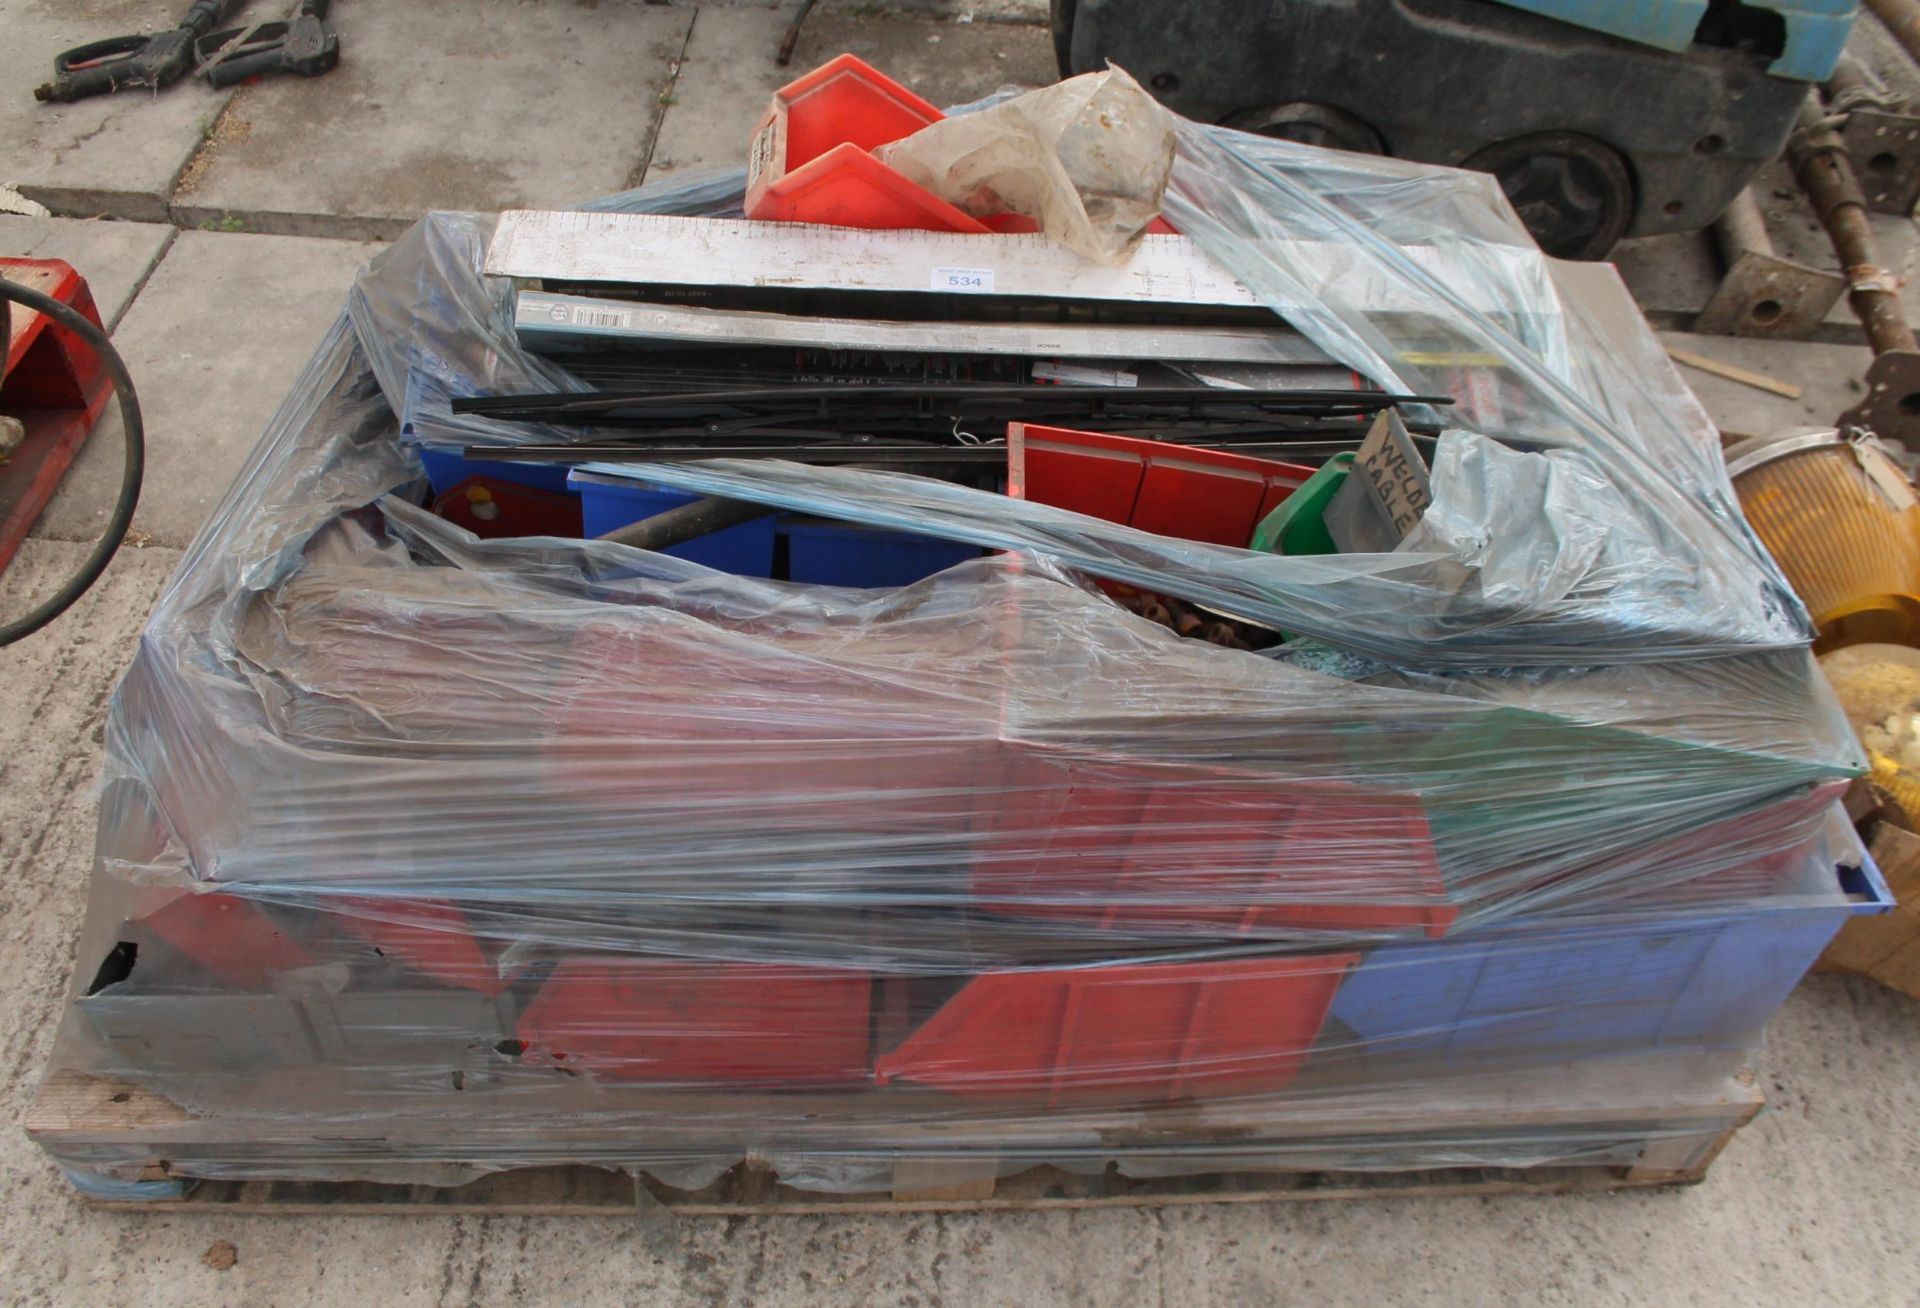 A PALLET FULL OF PLASTIC LIN BINS ALL COMPLETE WITH NUTS , BOLTS AND FURTHER HARDWARE